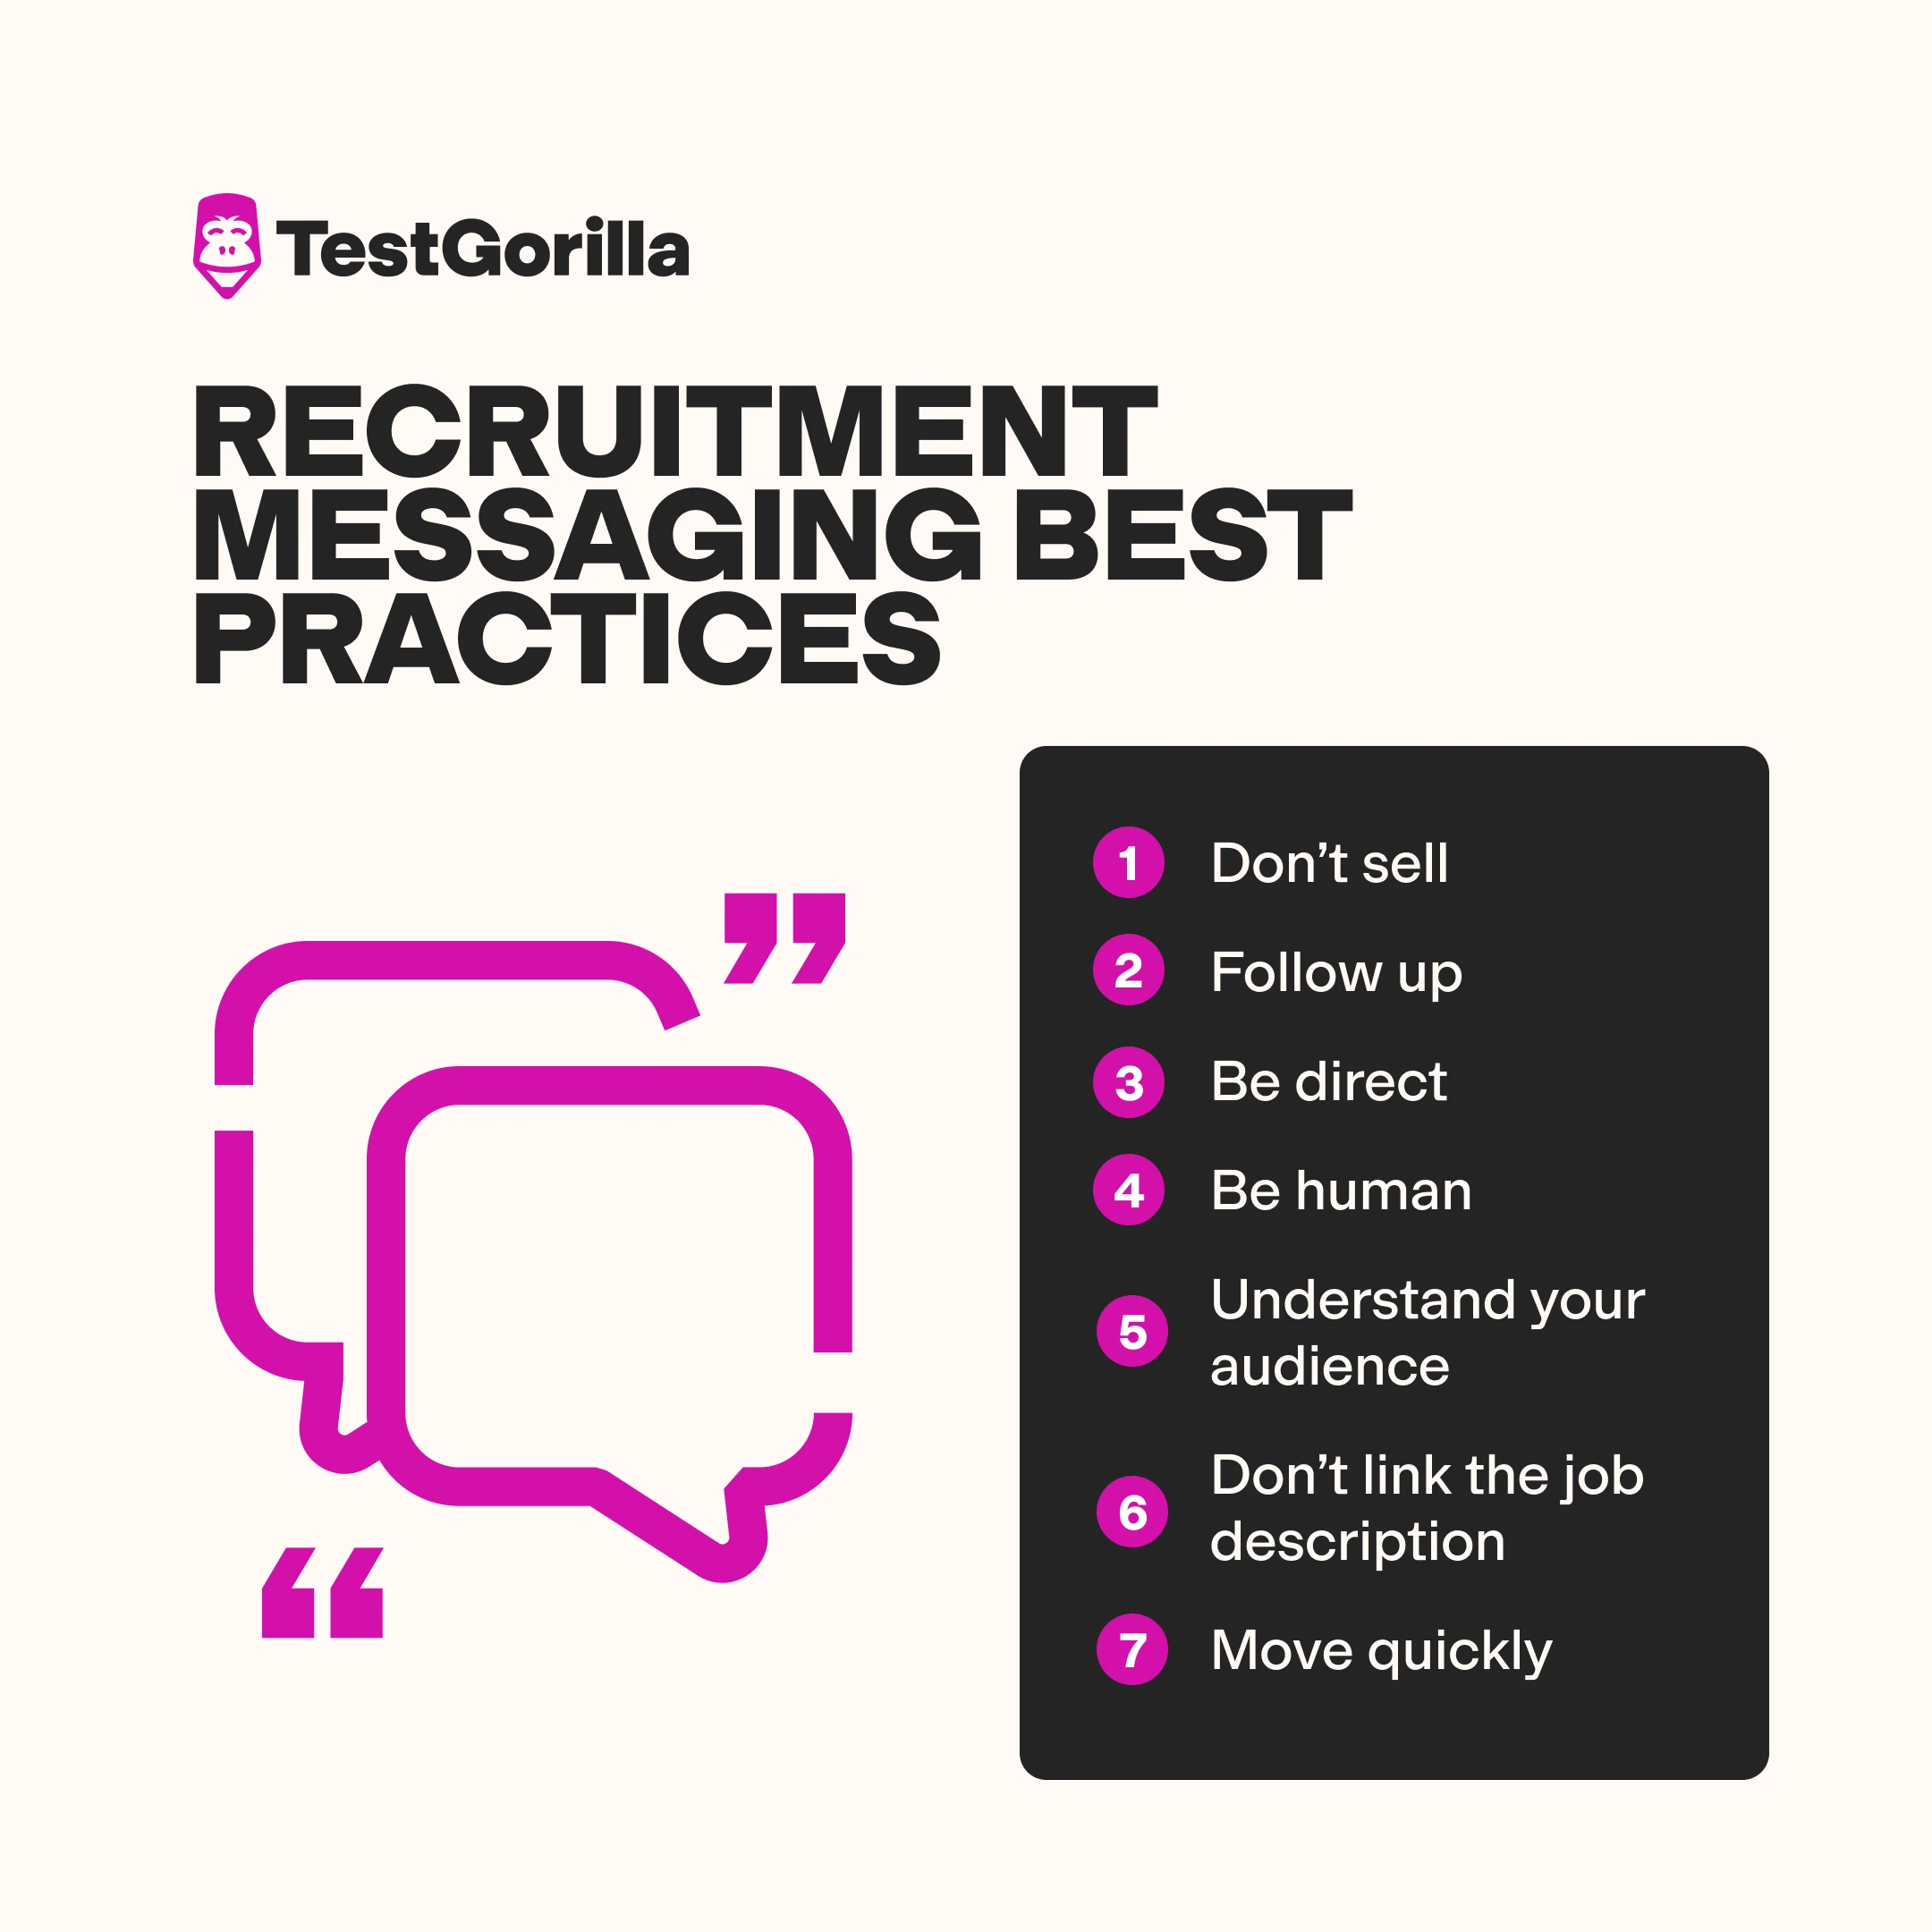 image showing recruitment messaging best practices